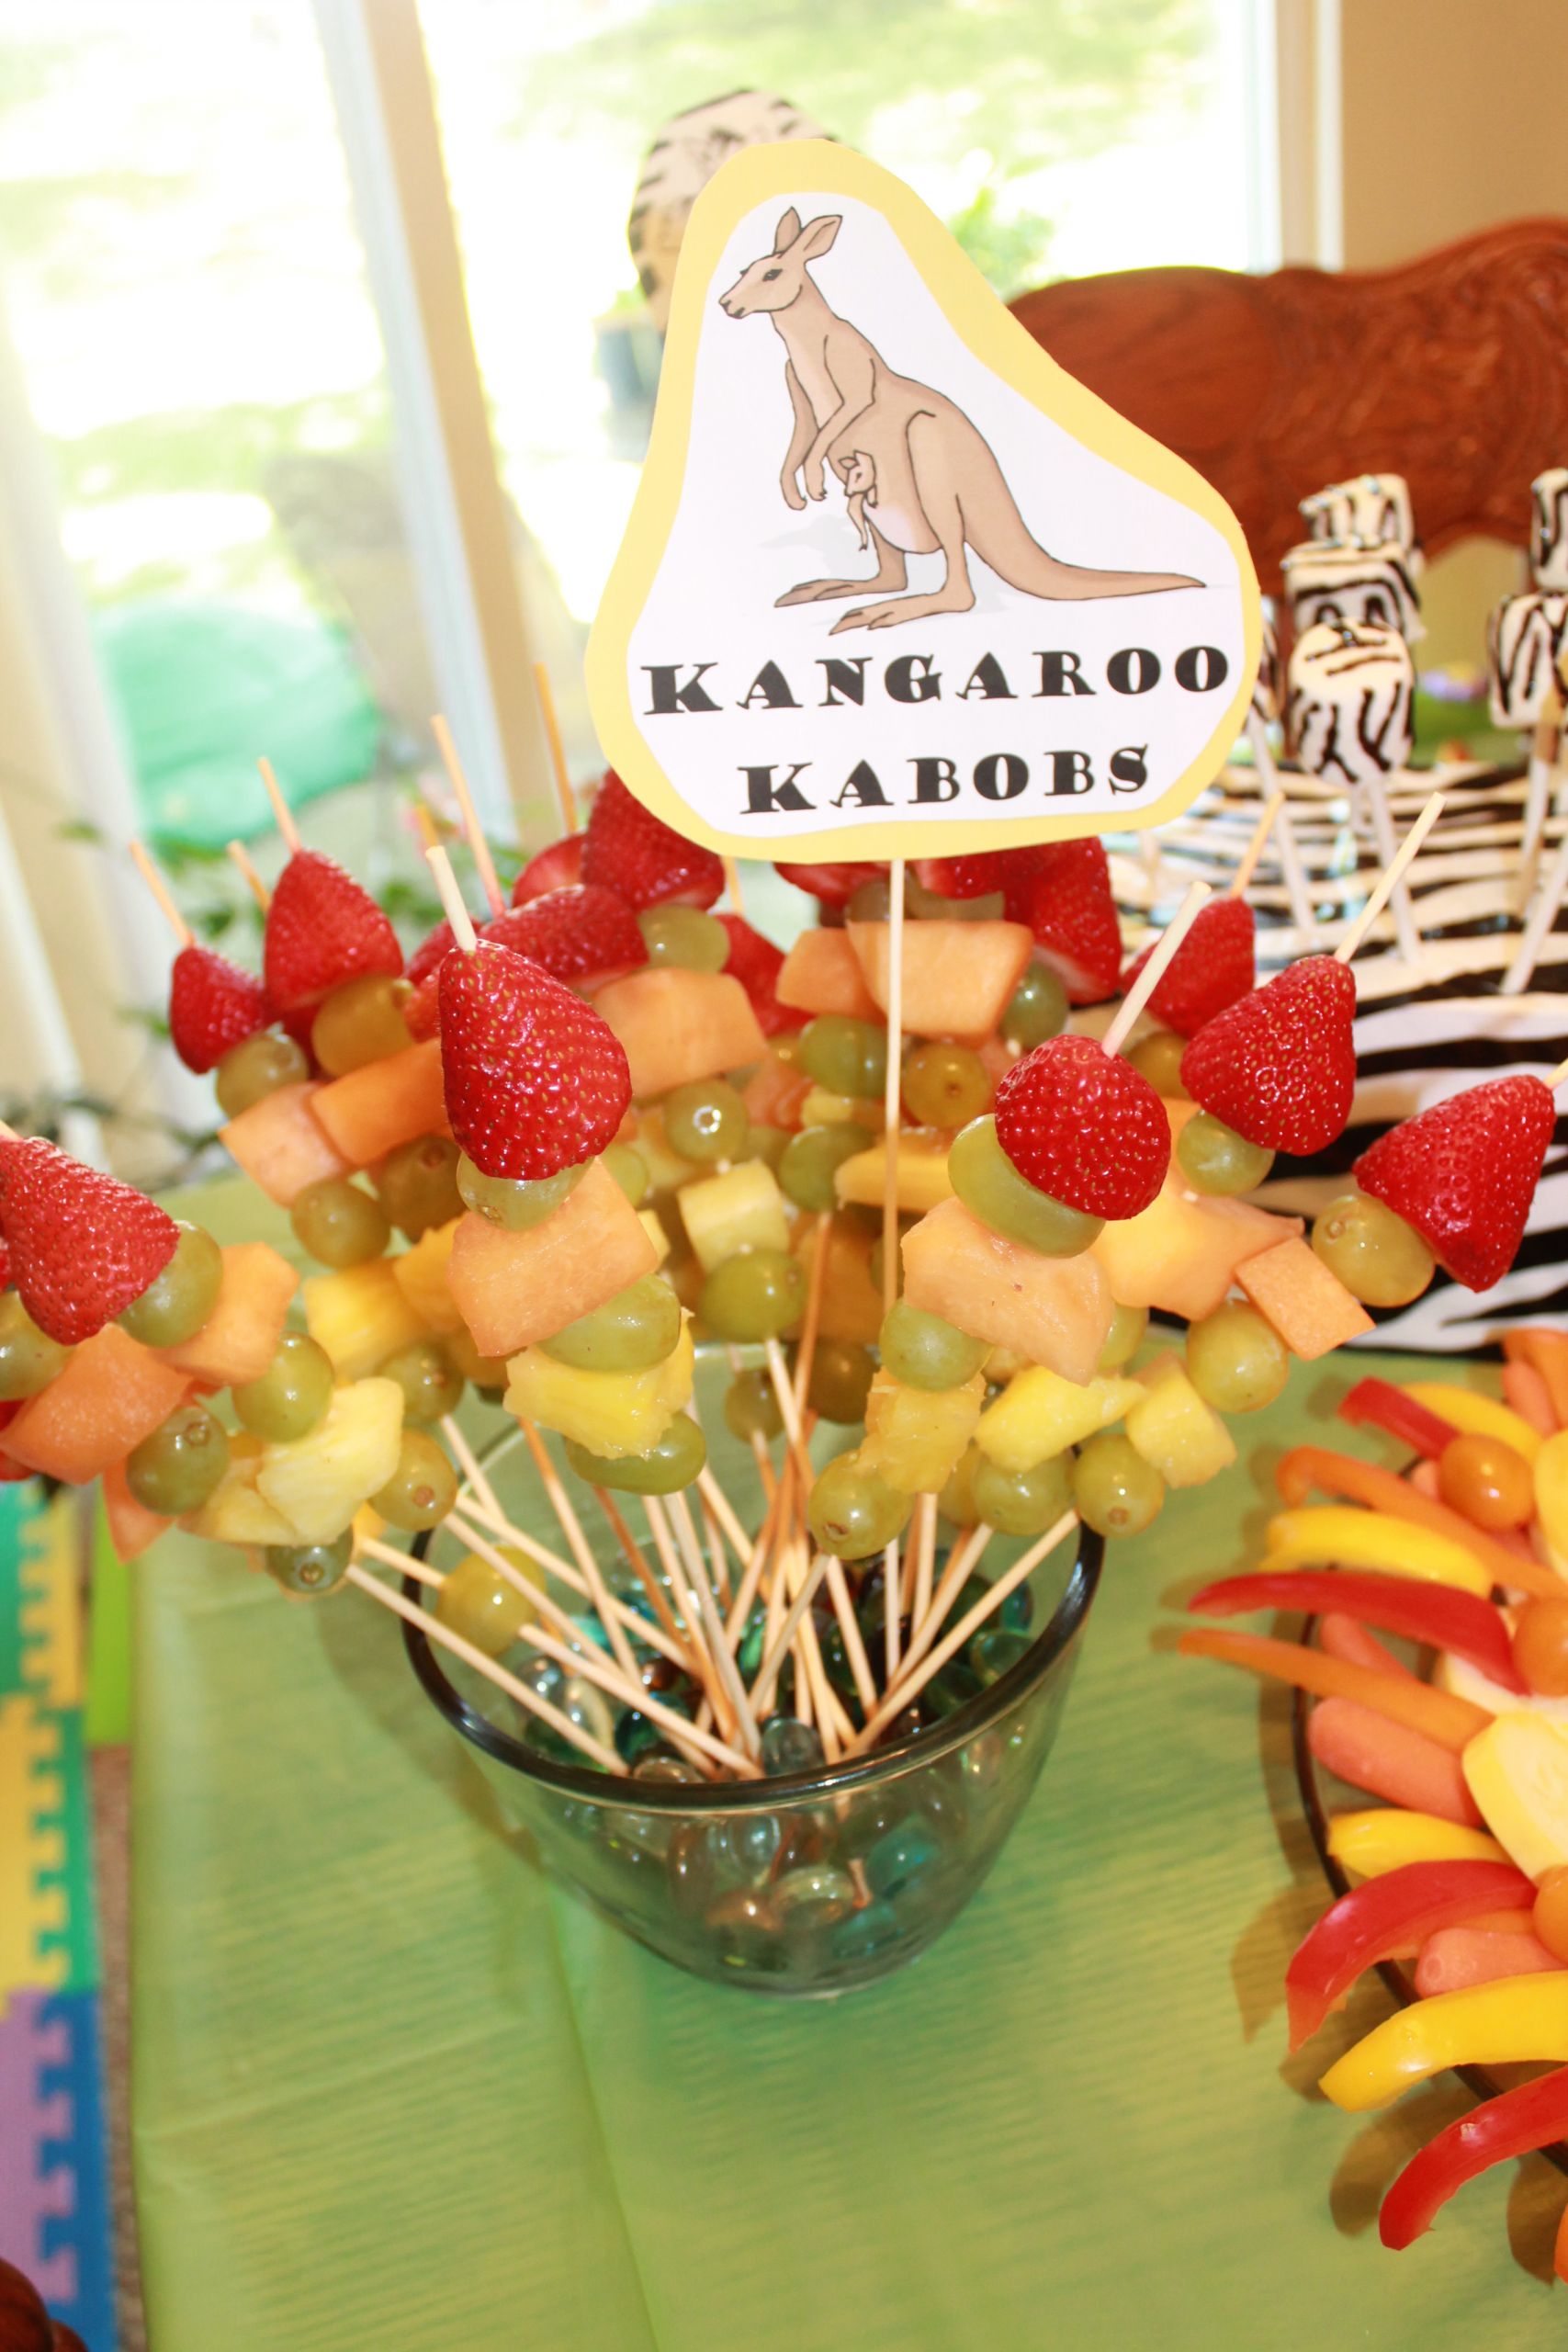 Zoo Birthday Party Food Ideas
 Kangaro kabobs and other fabulous food ideas for a zoo